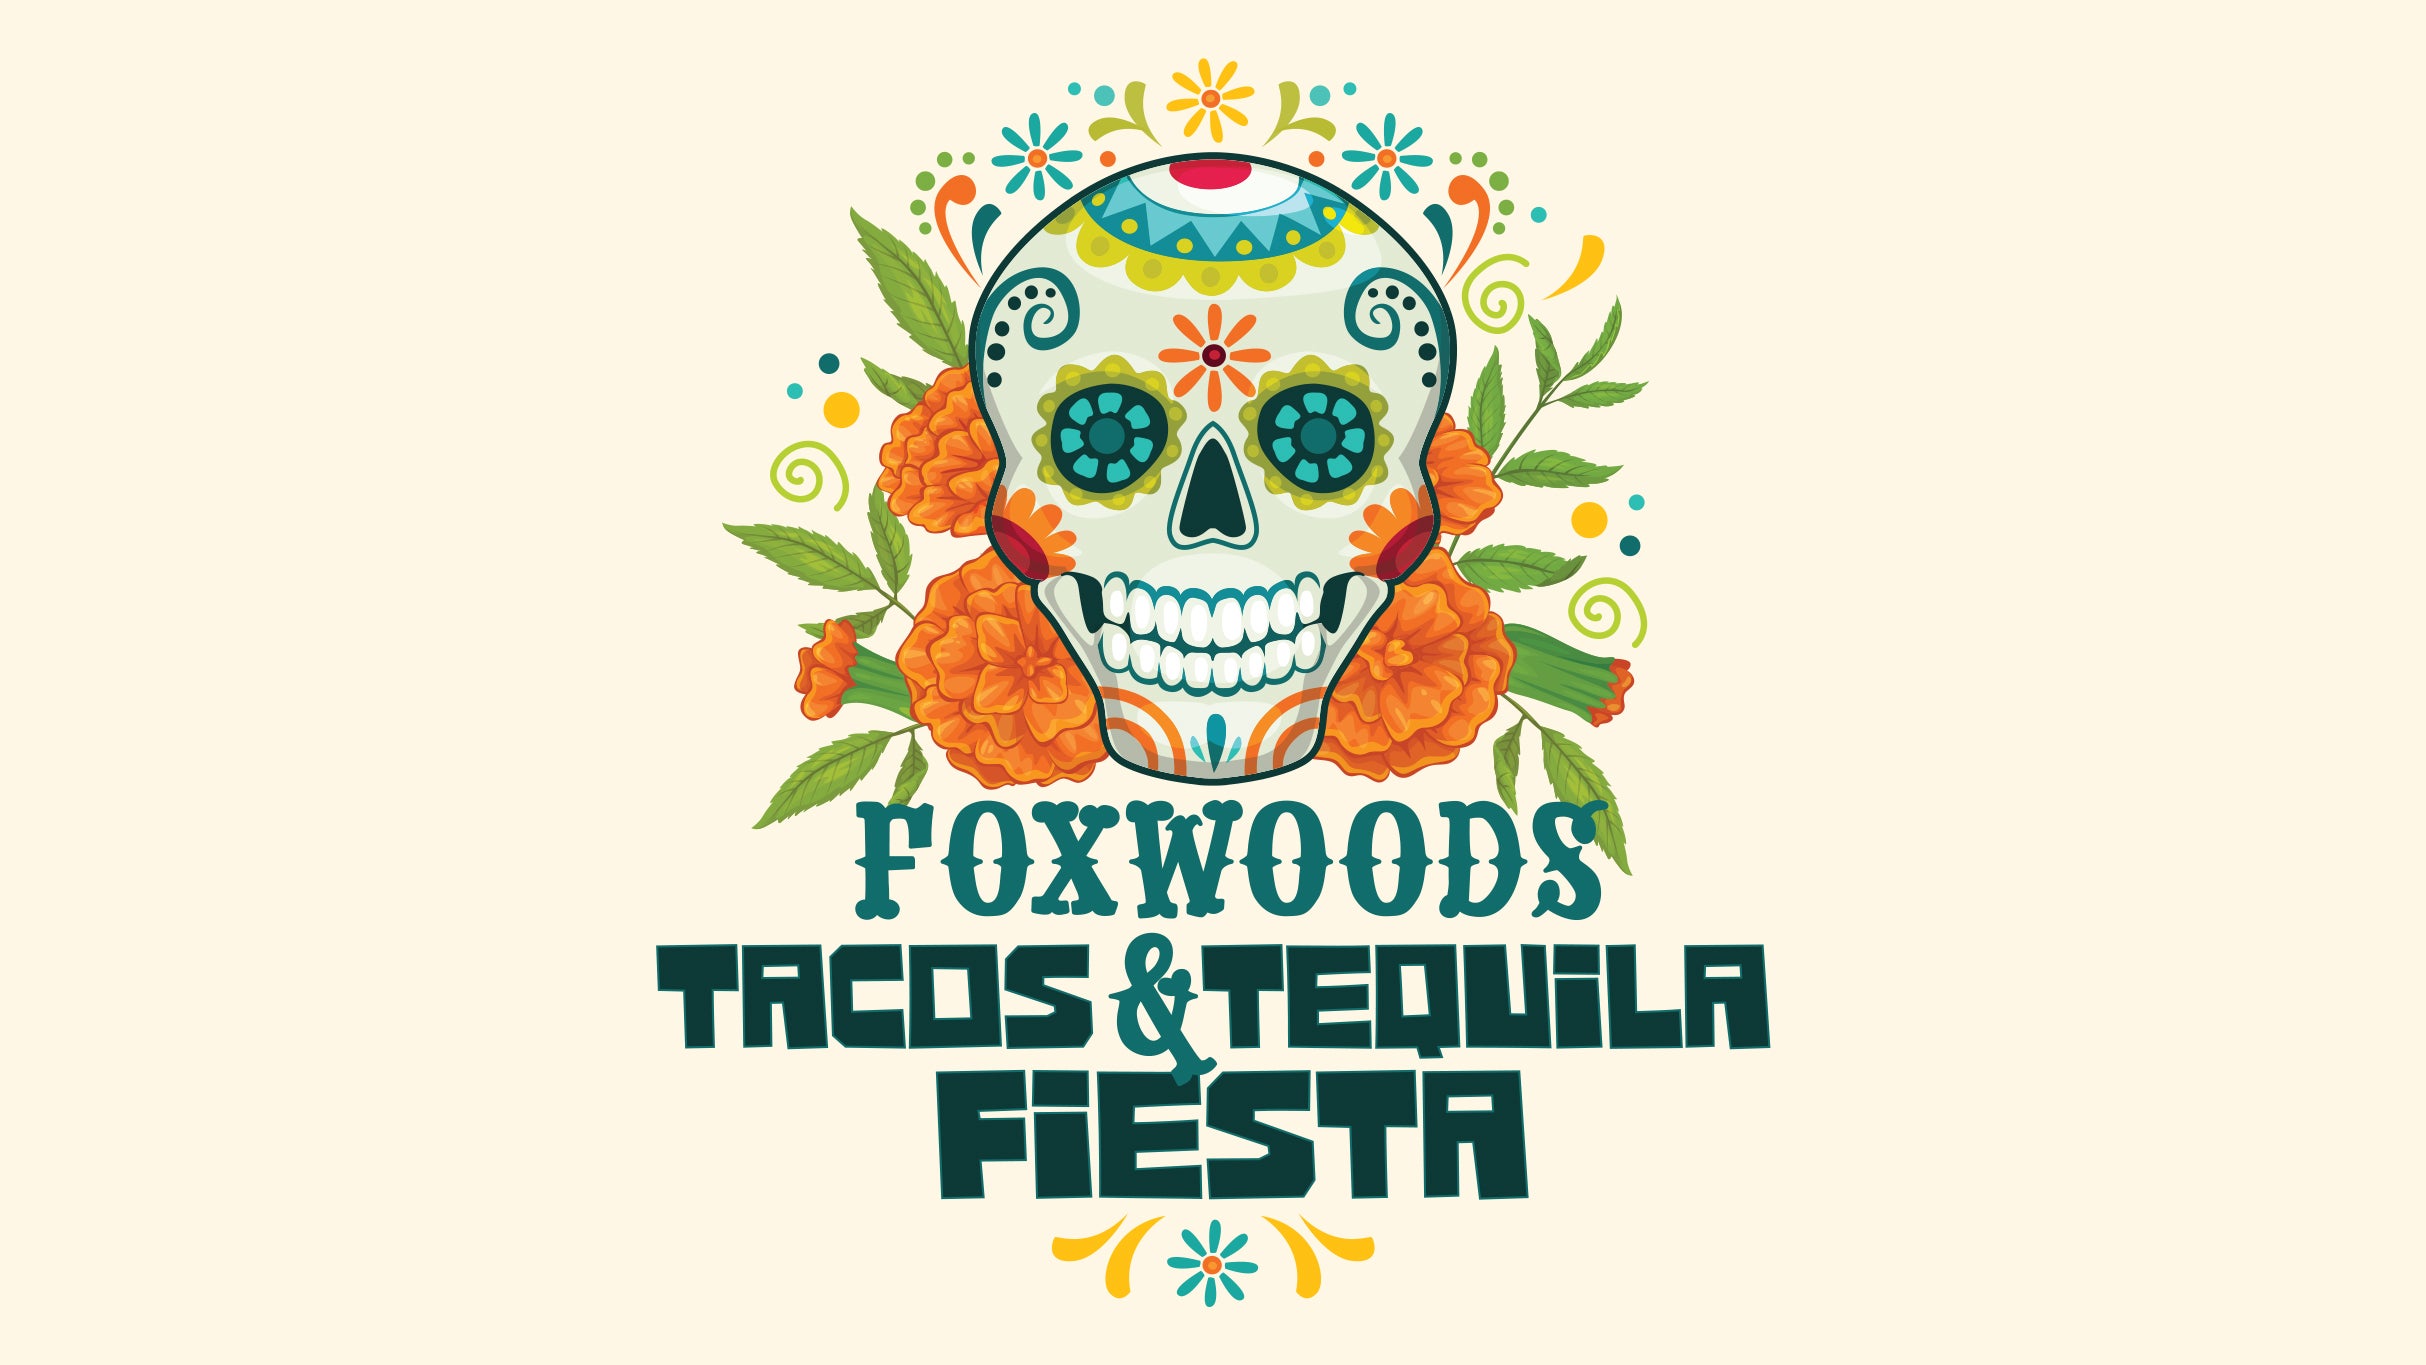 Foxwoods Tacos & Tequila Fiesta in Mashantucket promo photo for Designated Driver Ticket presale offer code